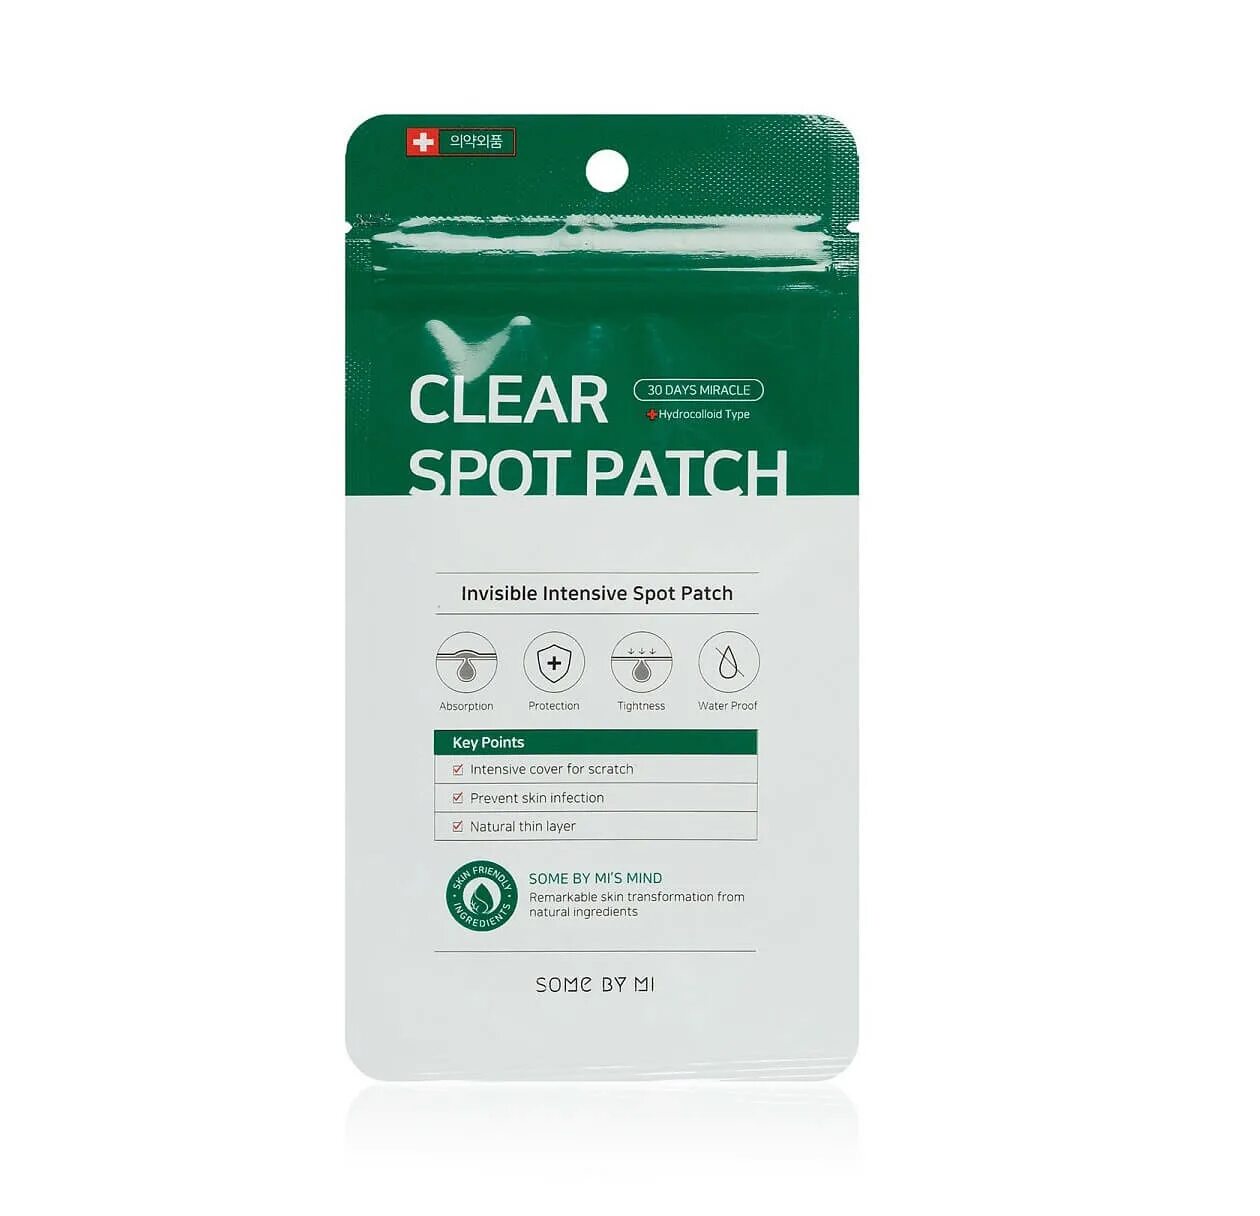 Some by mi Clear spot Patch. Some by mi патчи против прыщей антибактериальные - 30days Miracle Clear spot Patch. Антибактериальные наклейки против прыщей 30 Days Miracle Clear spot Patch. Some by mi патчи от прыщей. Clear patch